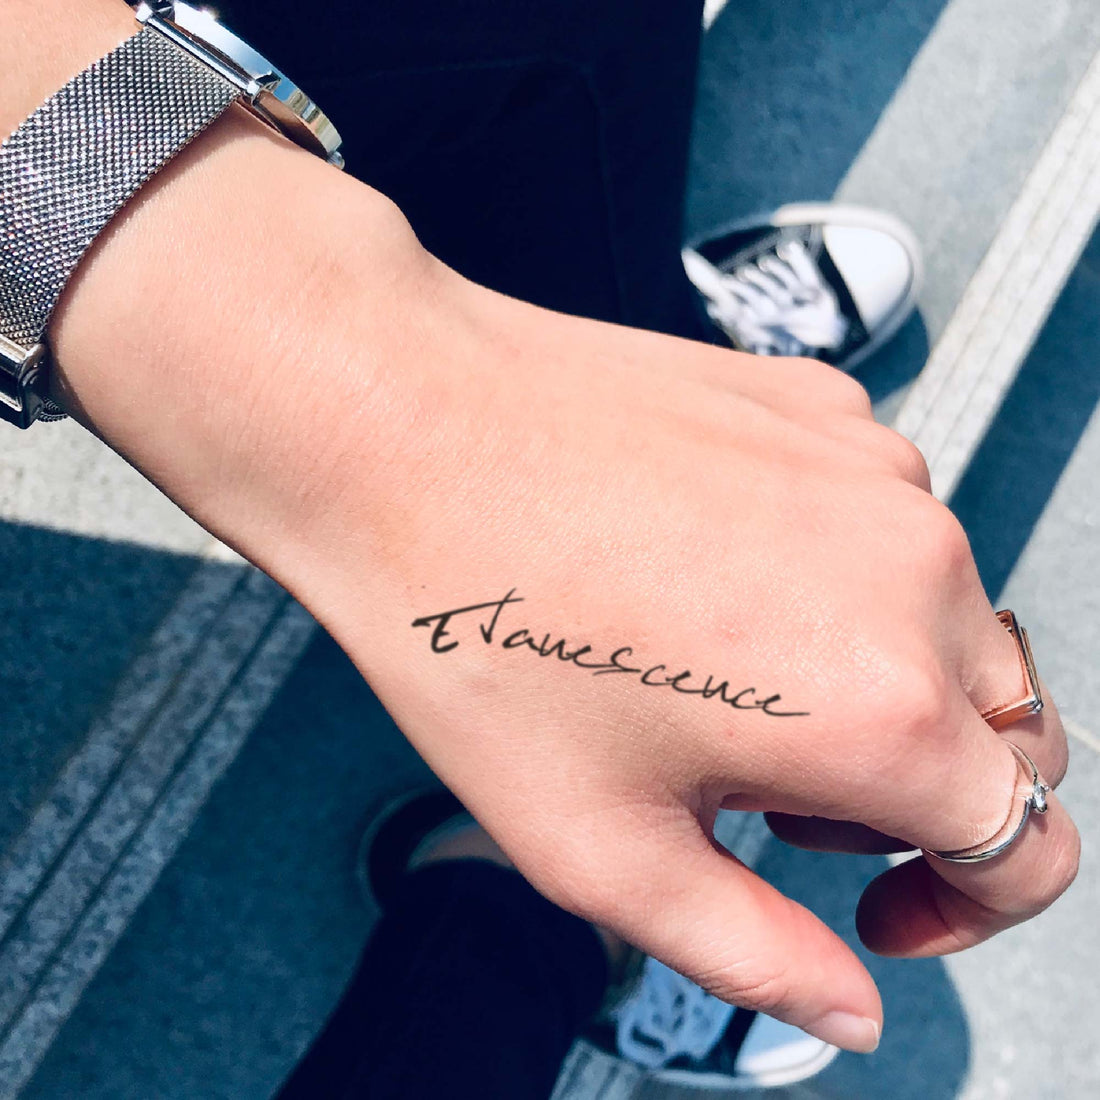 Evanescence custom temporary tattoo sticker design idea inspiration meanings removal arm wrist hand words font name signature calligraphy lyrics tour concert outfits merch accessory gift souvenir costumes wear dress up code